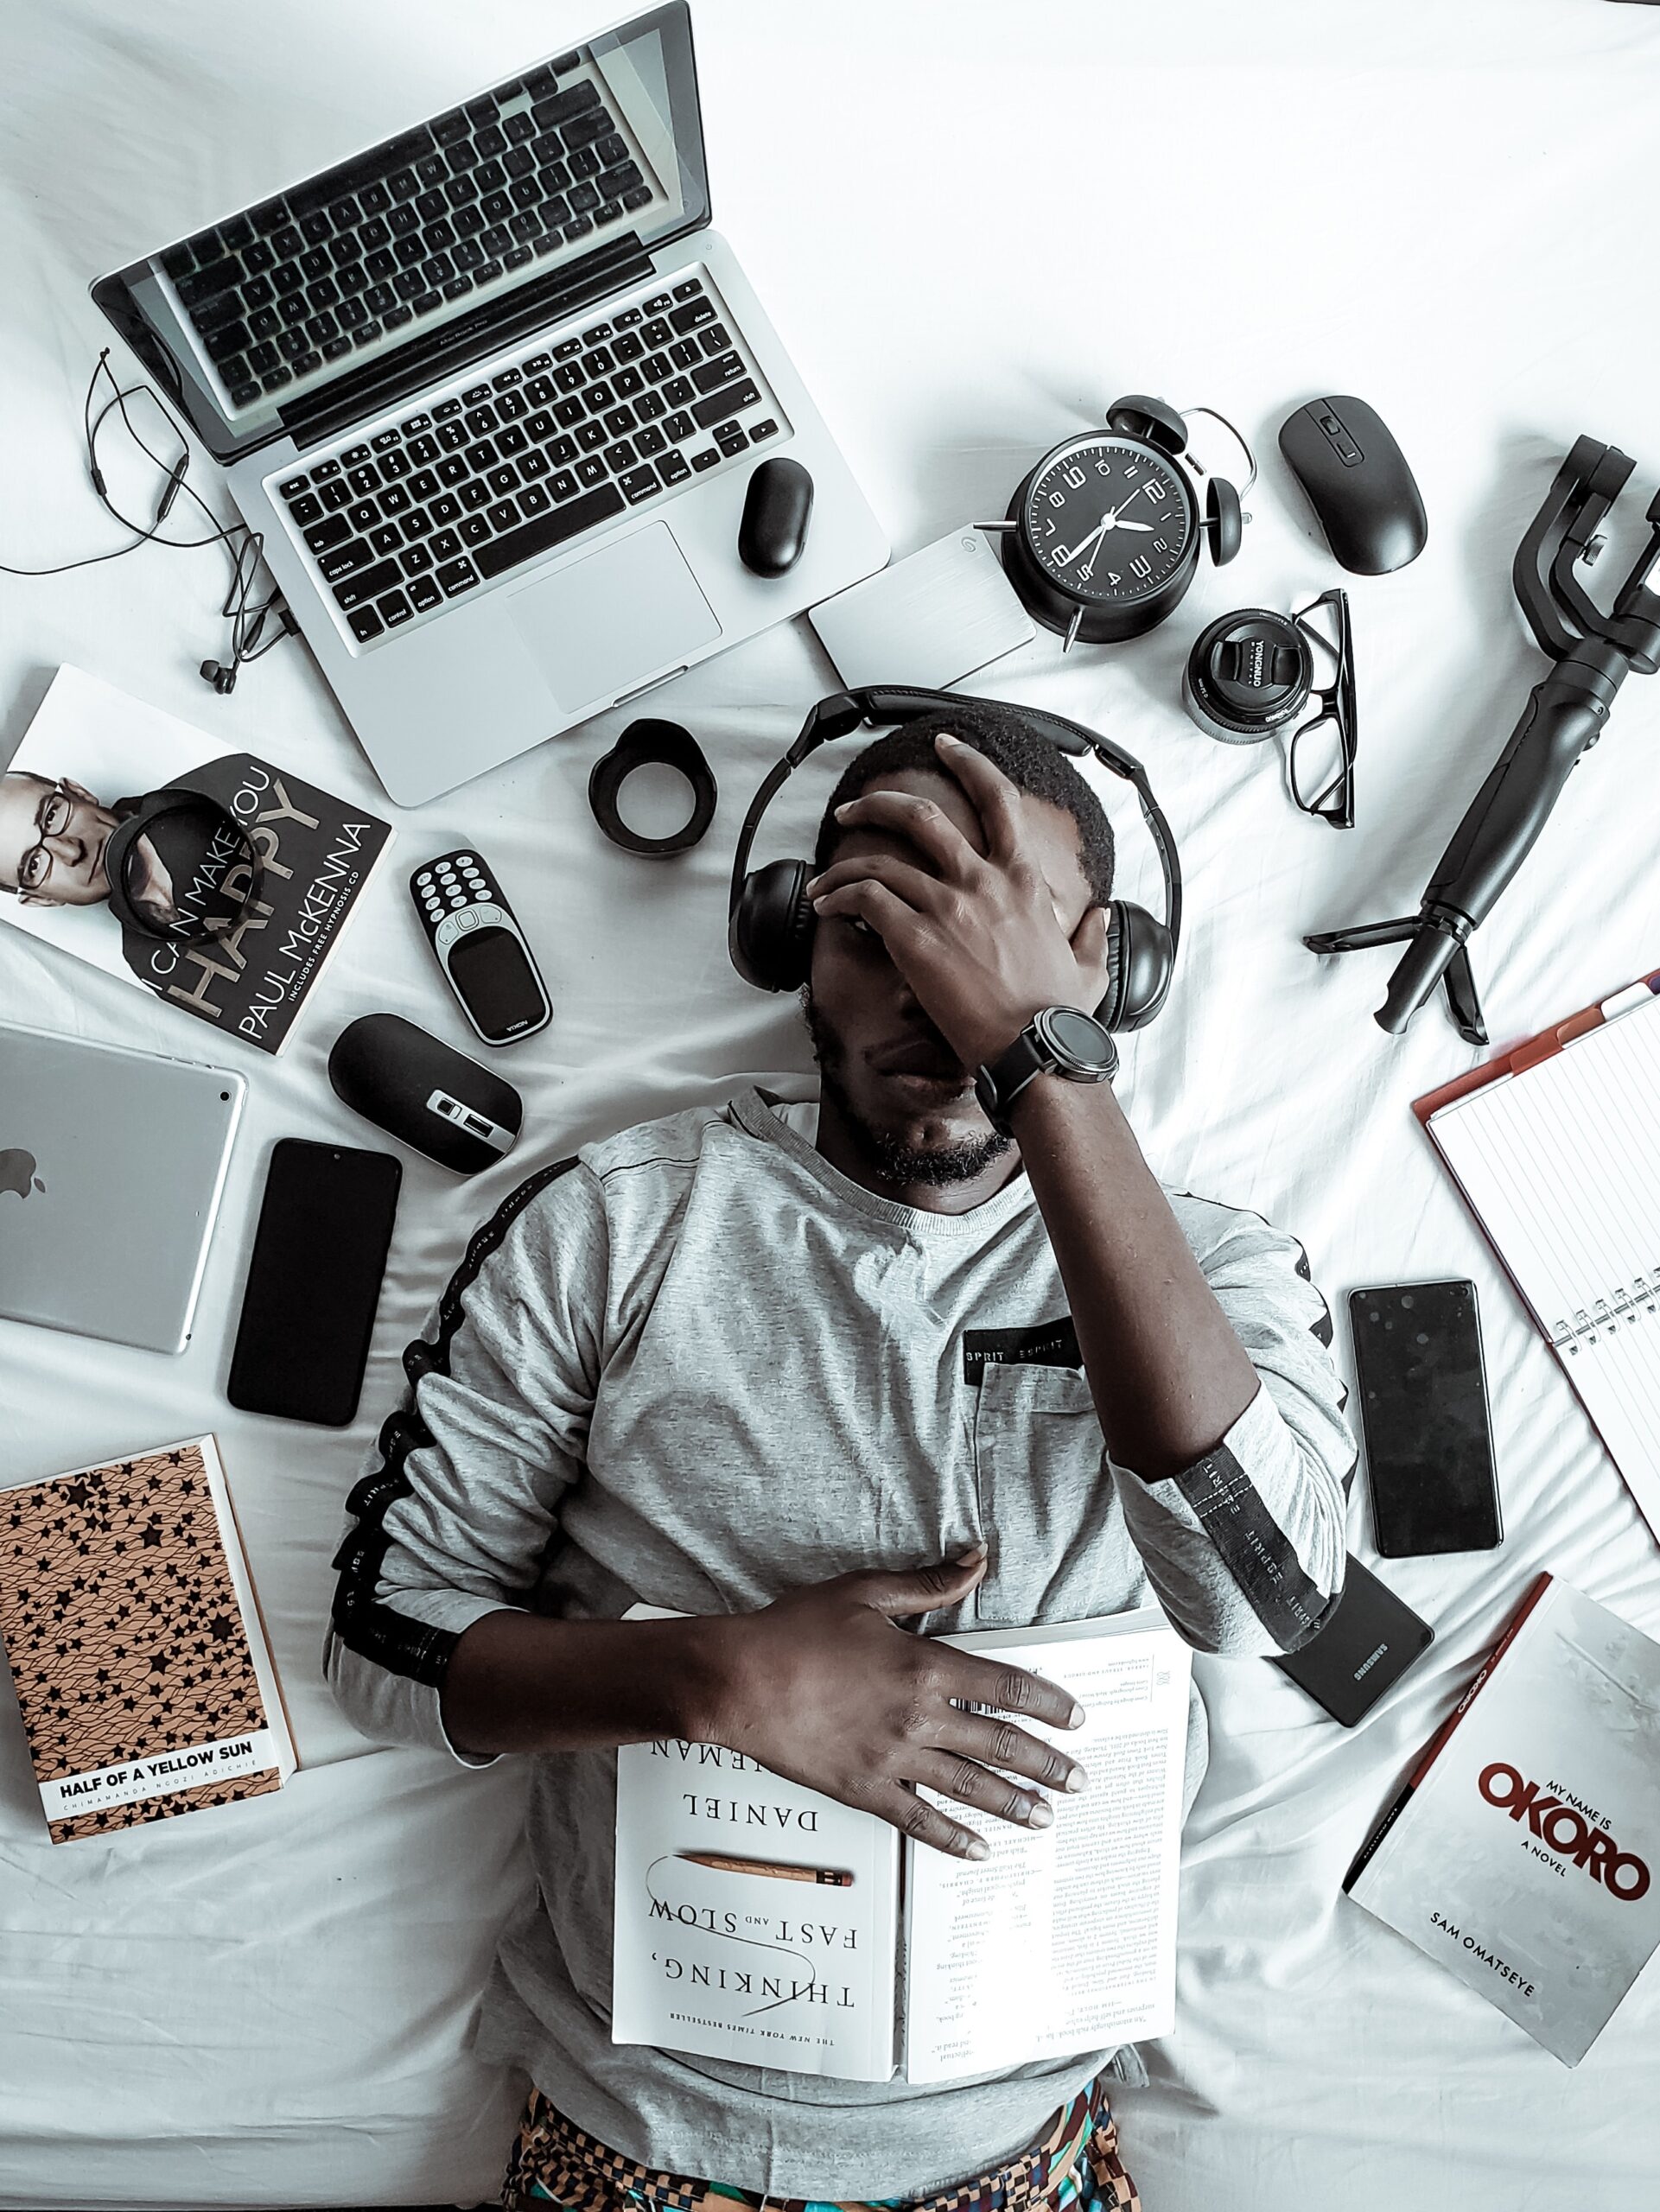 Person laying on a bed while wearing headphones, surrounded by items commonly found in a workplace office.